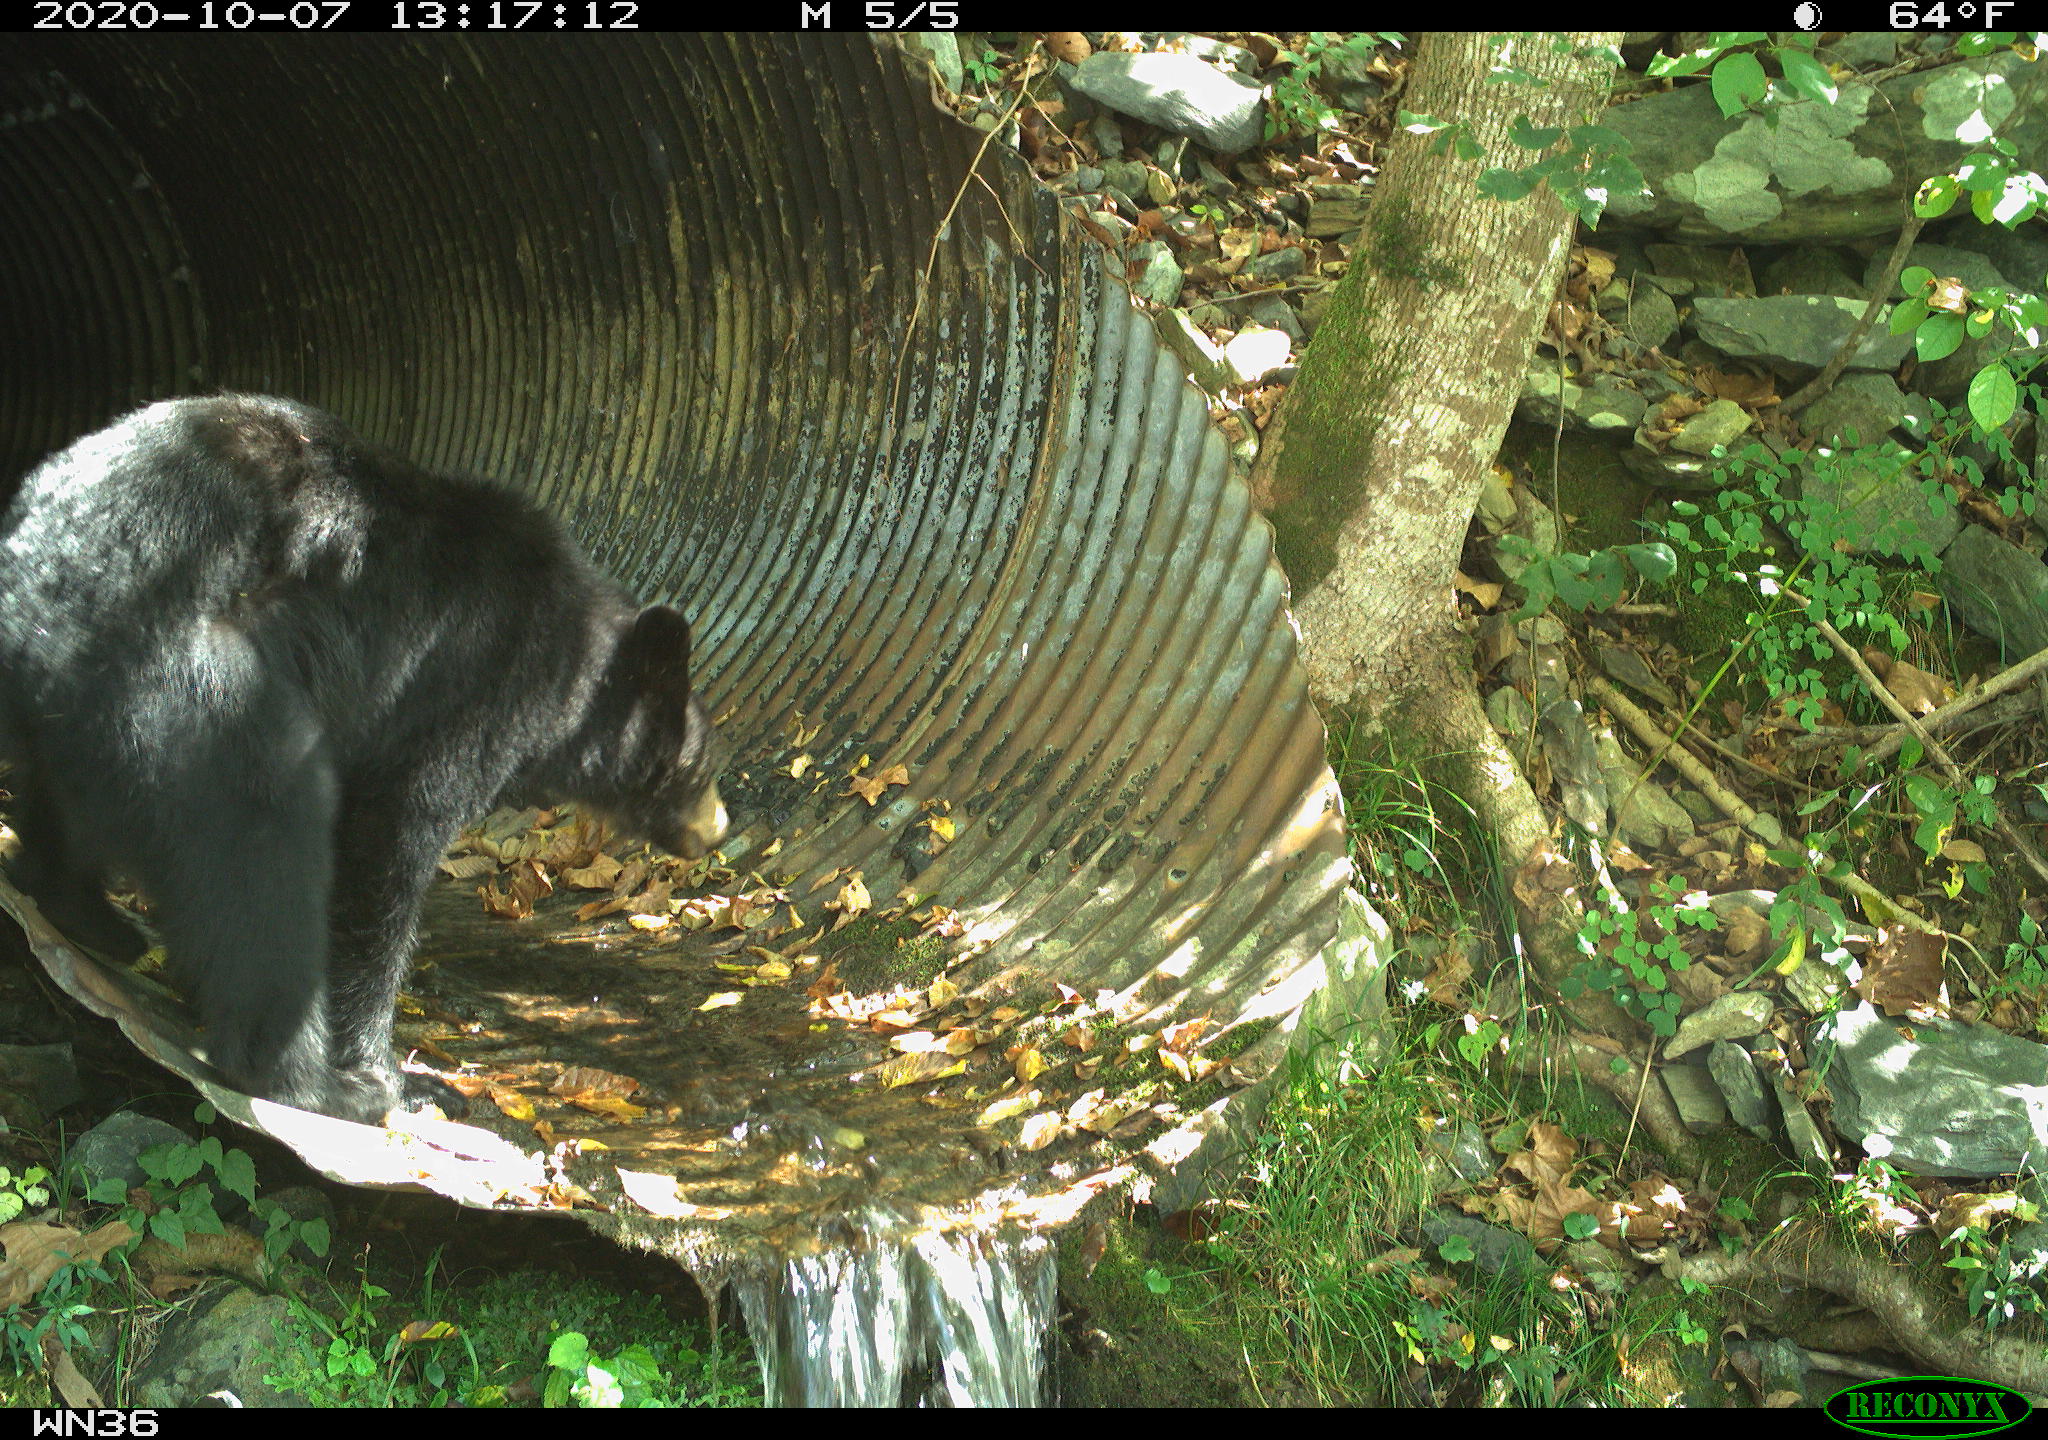 A black bear explores a culvert in this photo captured by one of the research team’s motion-activated camera traps. Photo: Wildlands Network / NPCA